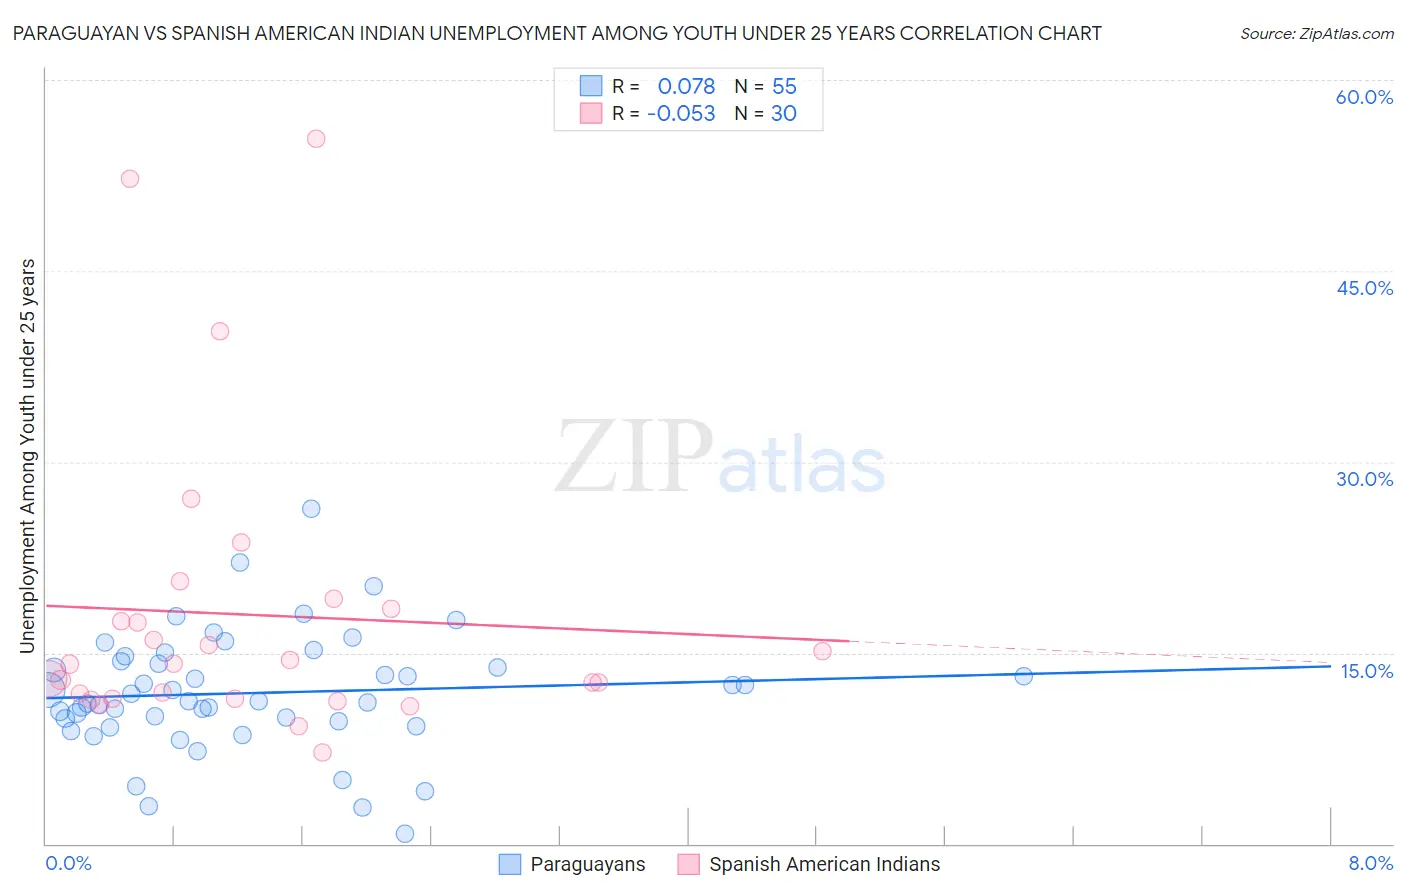 Paraguayan vs Spanish American Indian Unemployment Among Youth under 25 years